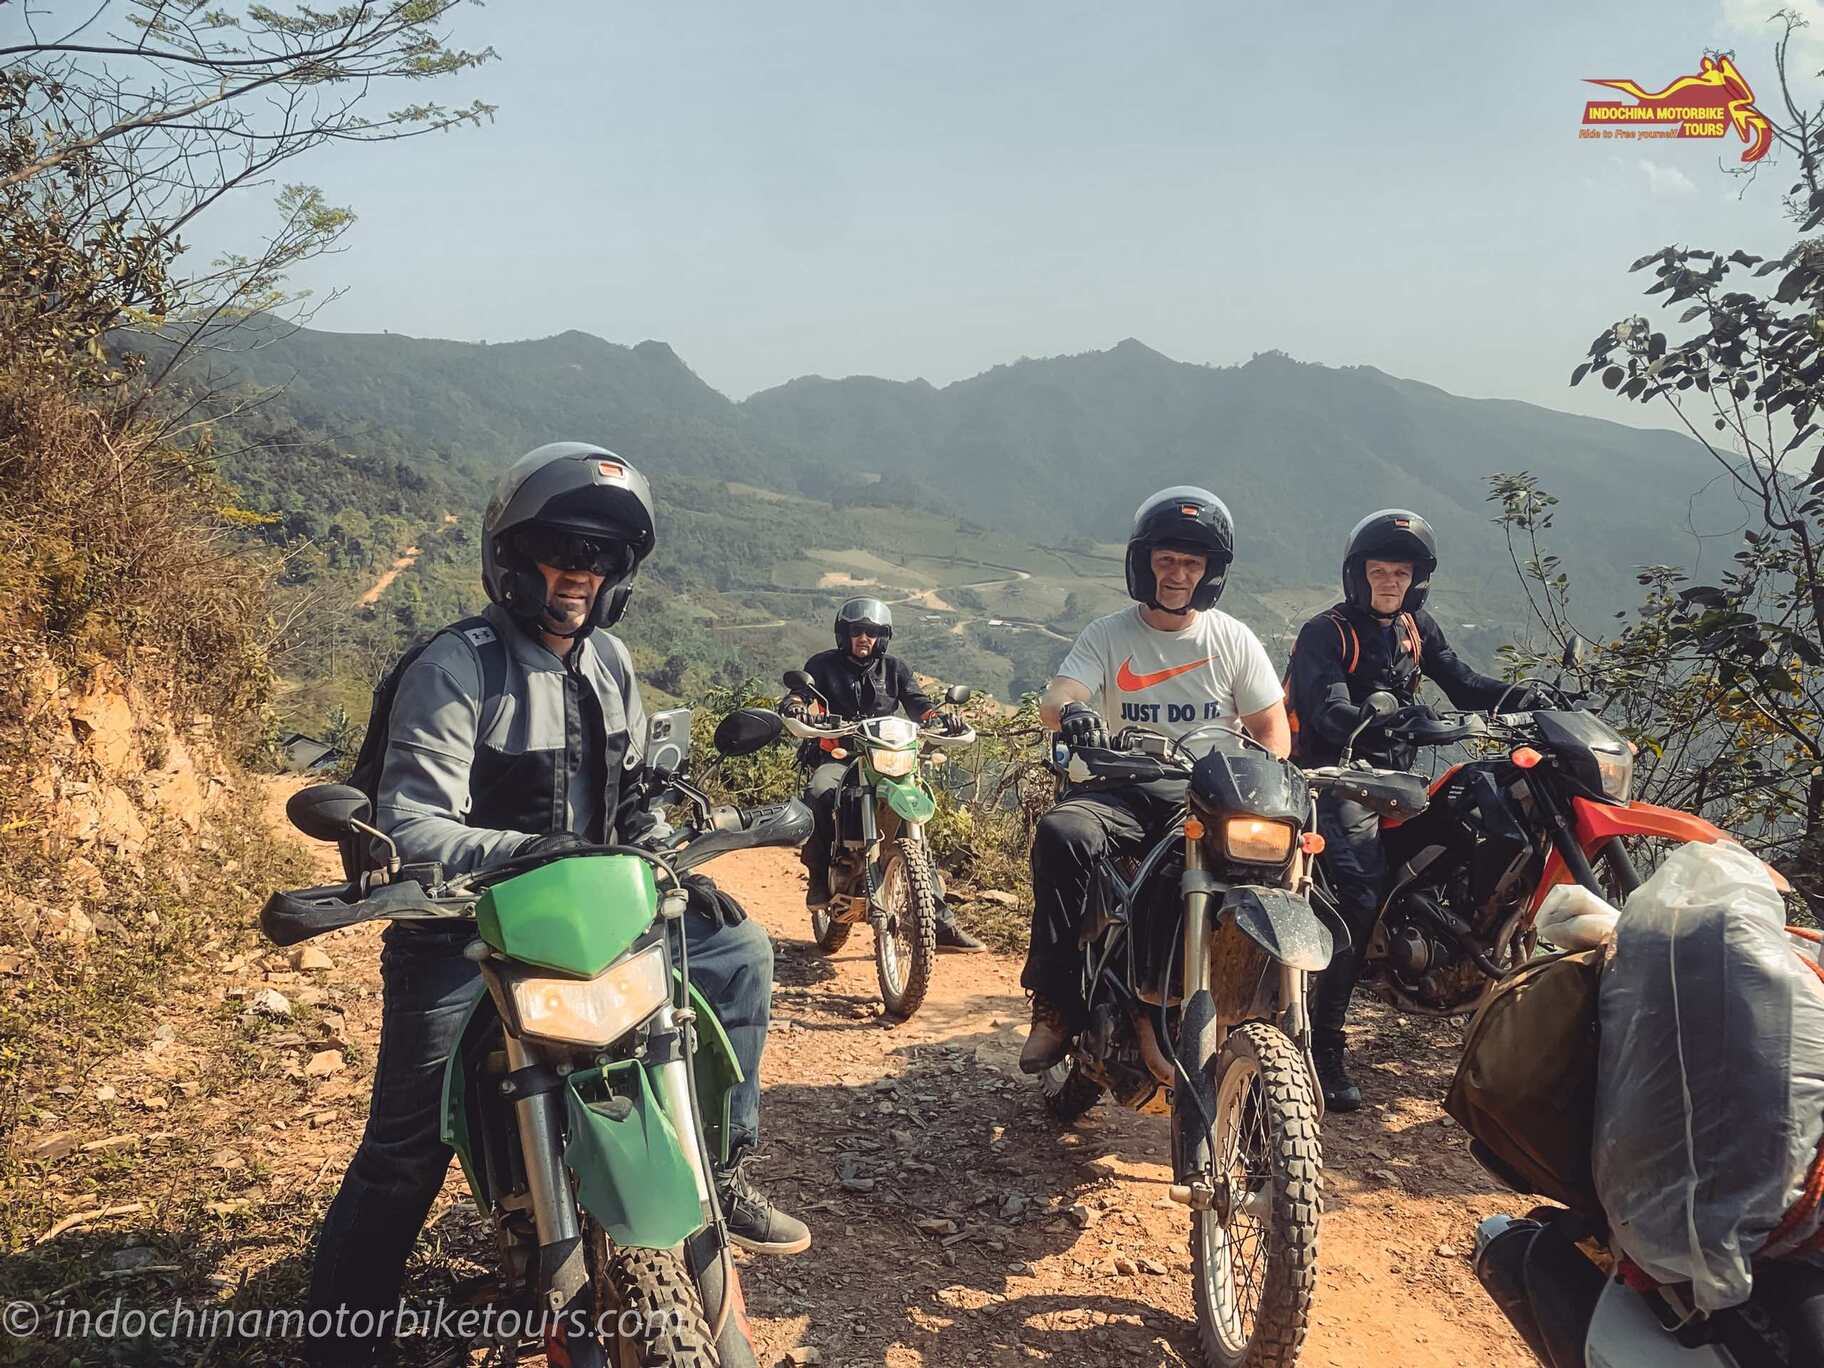 Exceptional Hanoi Motorcycle Tour to Mau Son and Bac Son in Lang Son